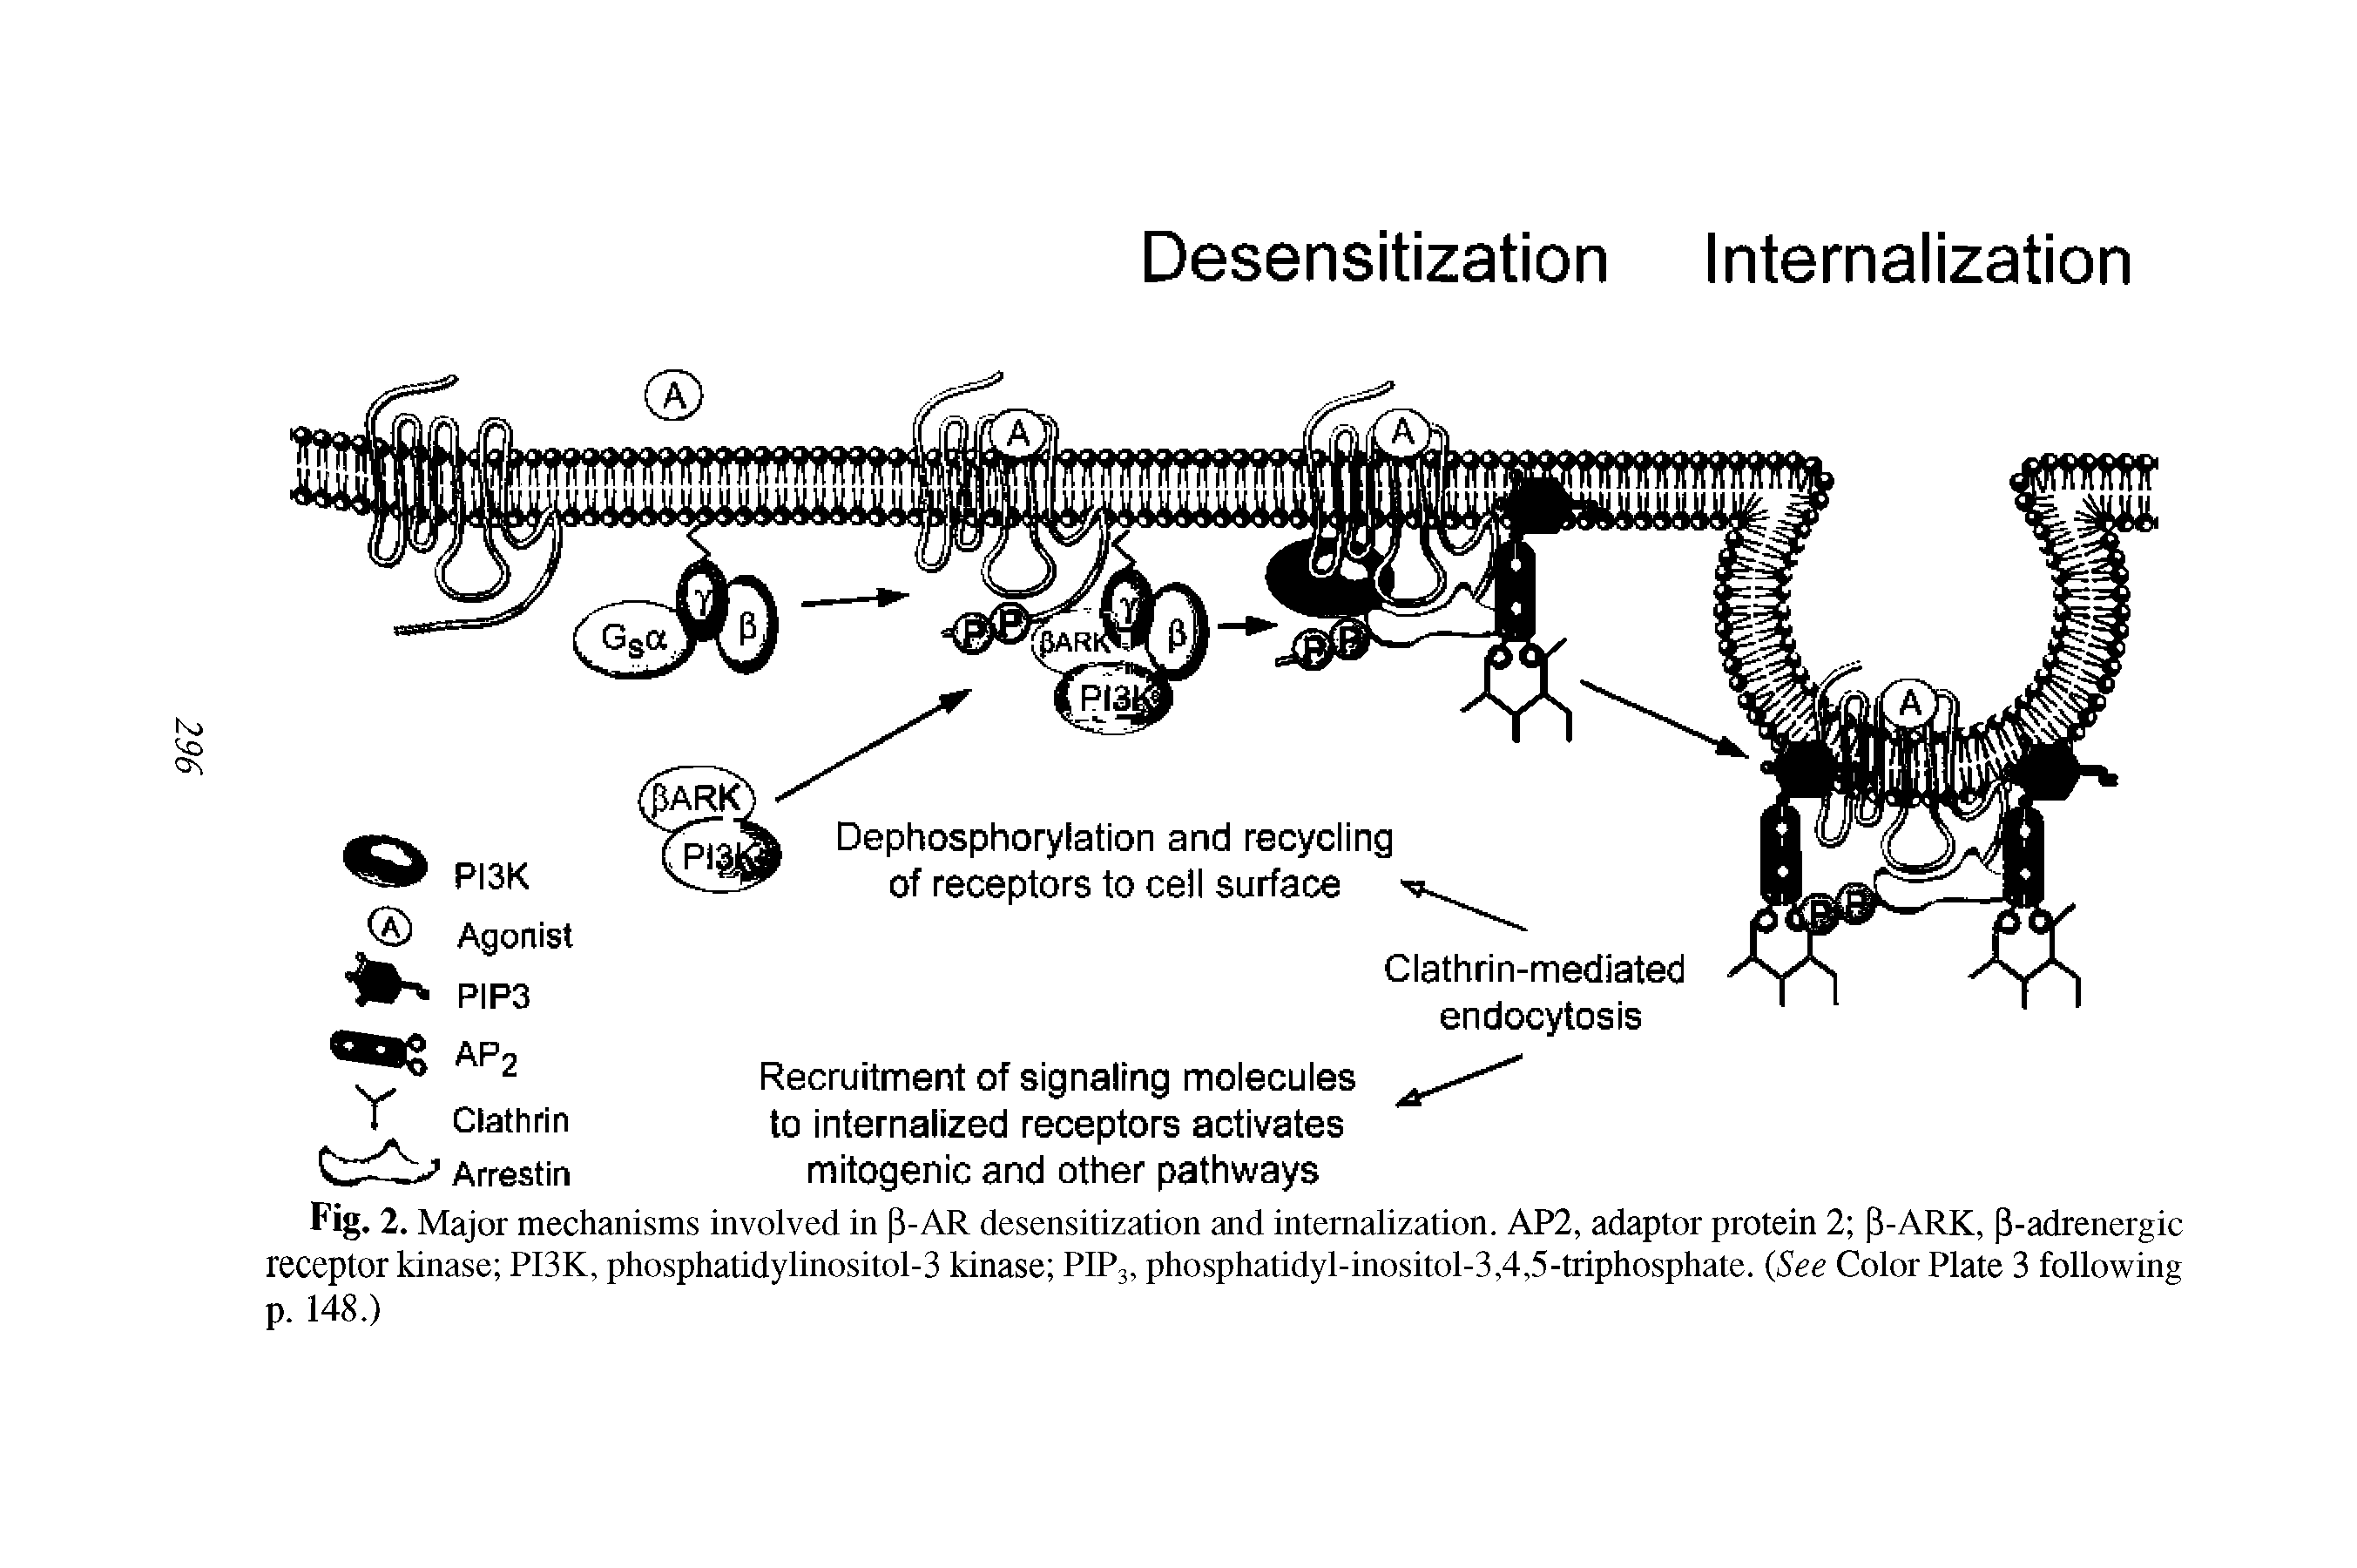 Fig. 2. Major mechanisms involved in [i-AR desensitization and internalization. AP2, adaptor protein 2 p-ARK, P-adrenergic receptor kinase PI3K, phosphatidylinositol-3 kinase PIP3, phosphatidyl-inositol-3,4,5-triphosphate. (See Color Plate 3 following p. 148.)...